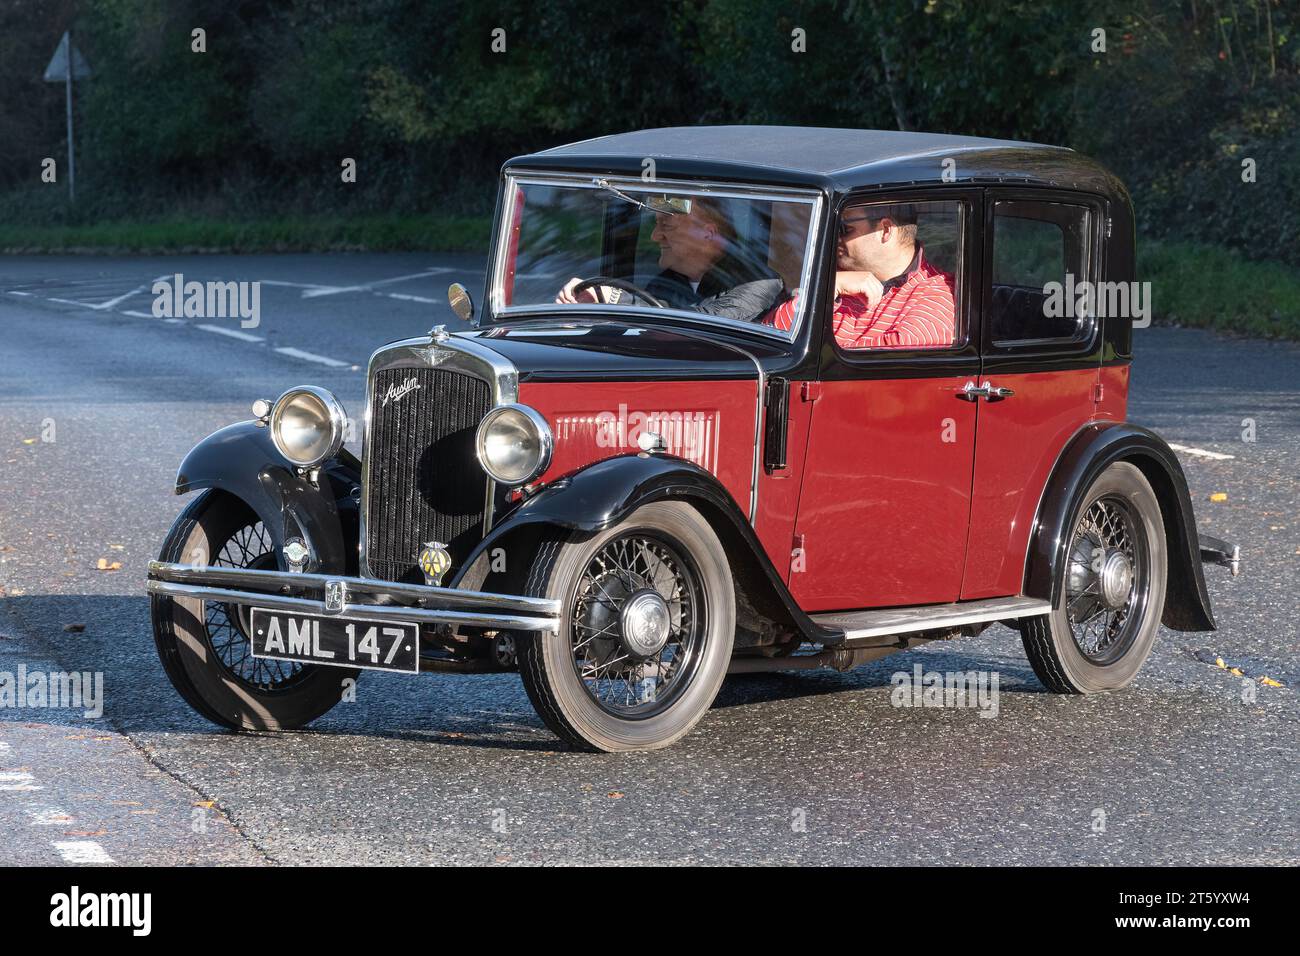 A red and black 1933 Austin 10 motor car on the road, England, UK Stock Photo